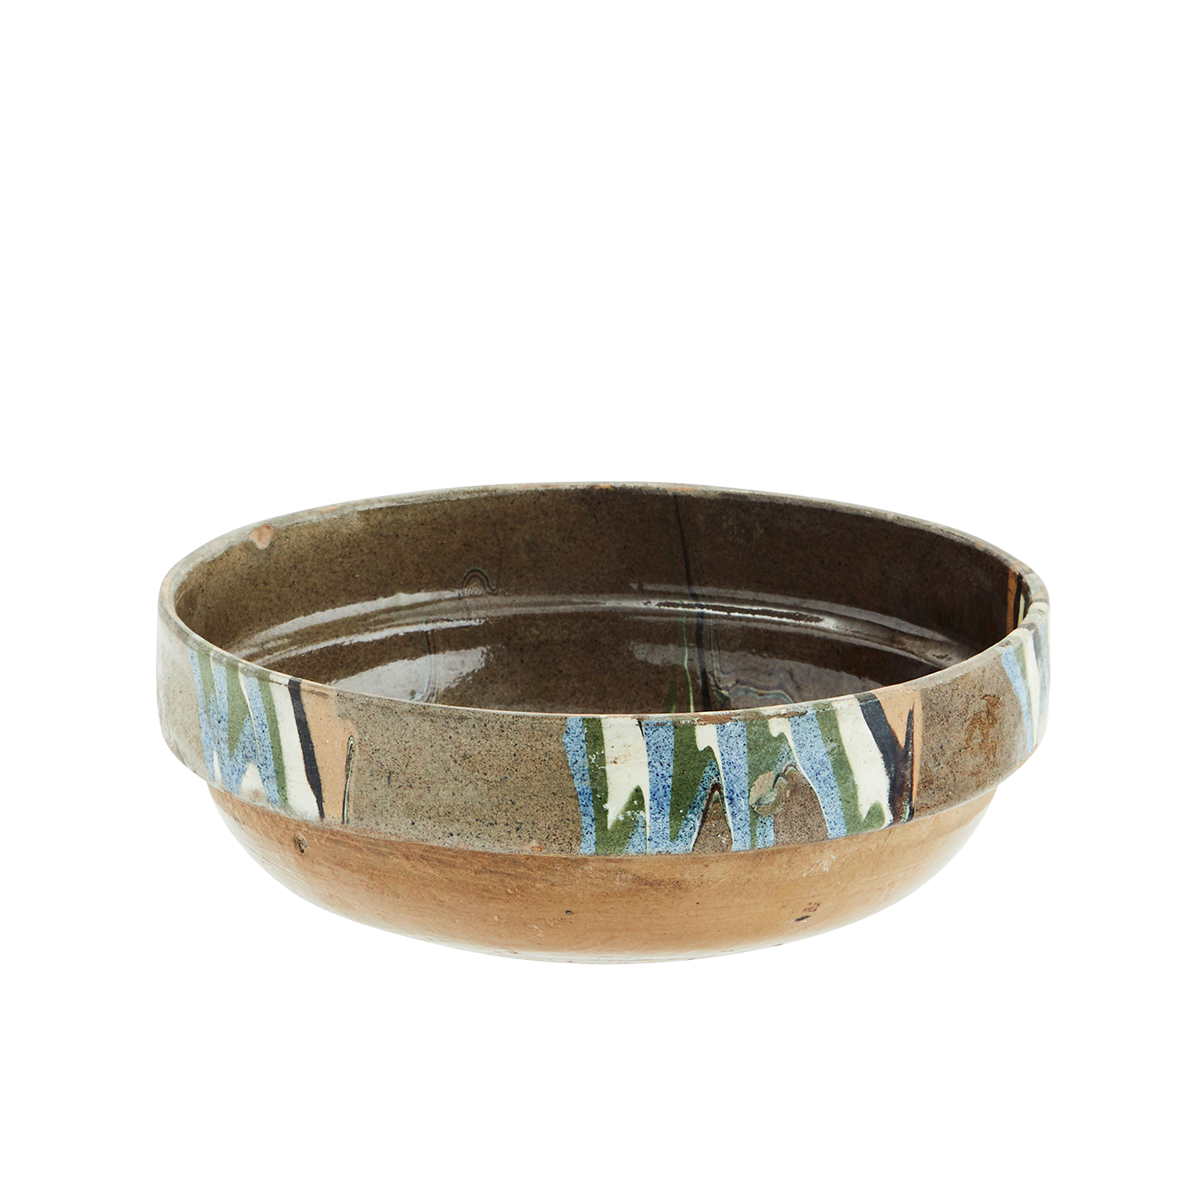 Re-used earthenware bowl